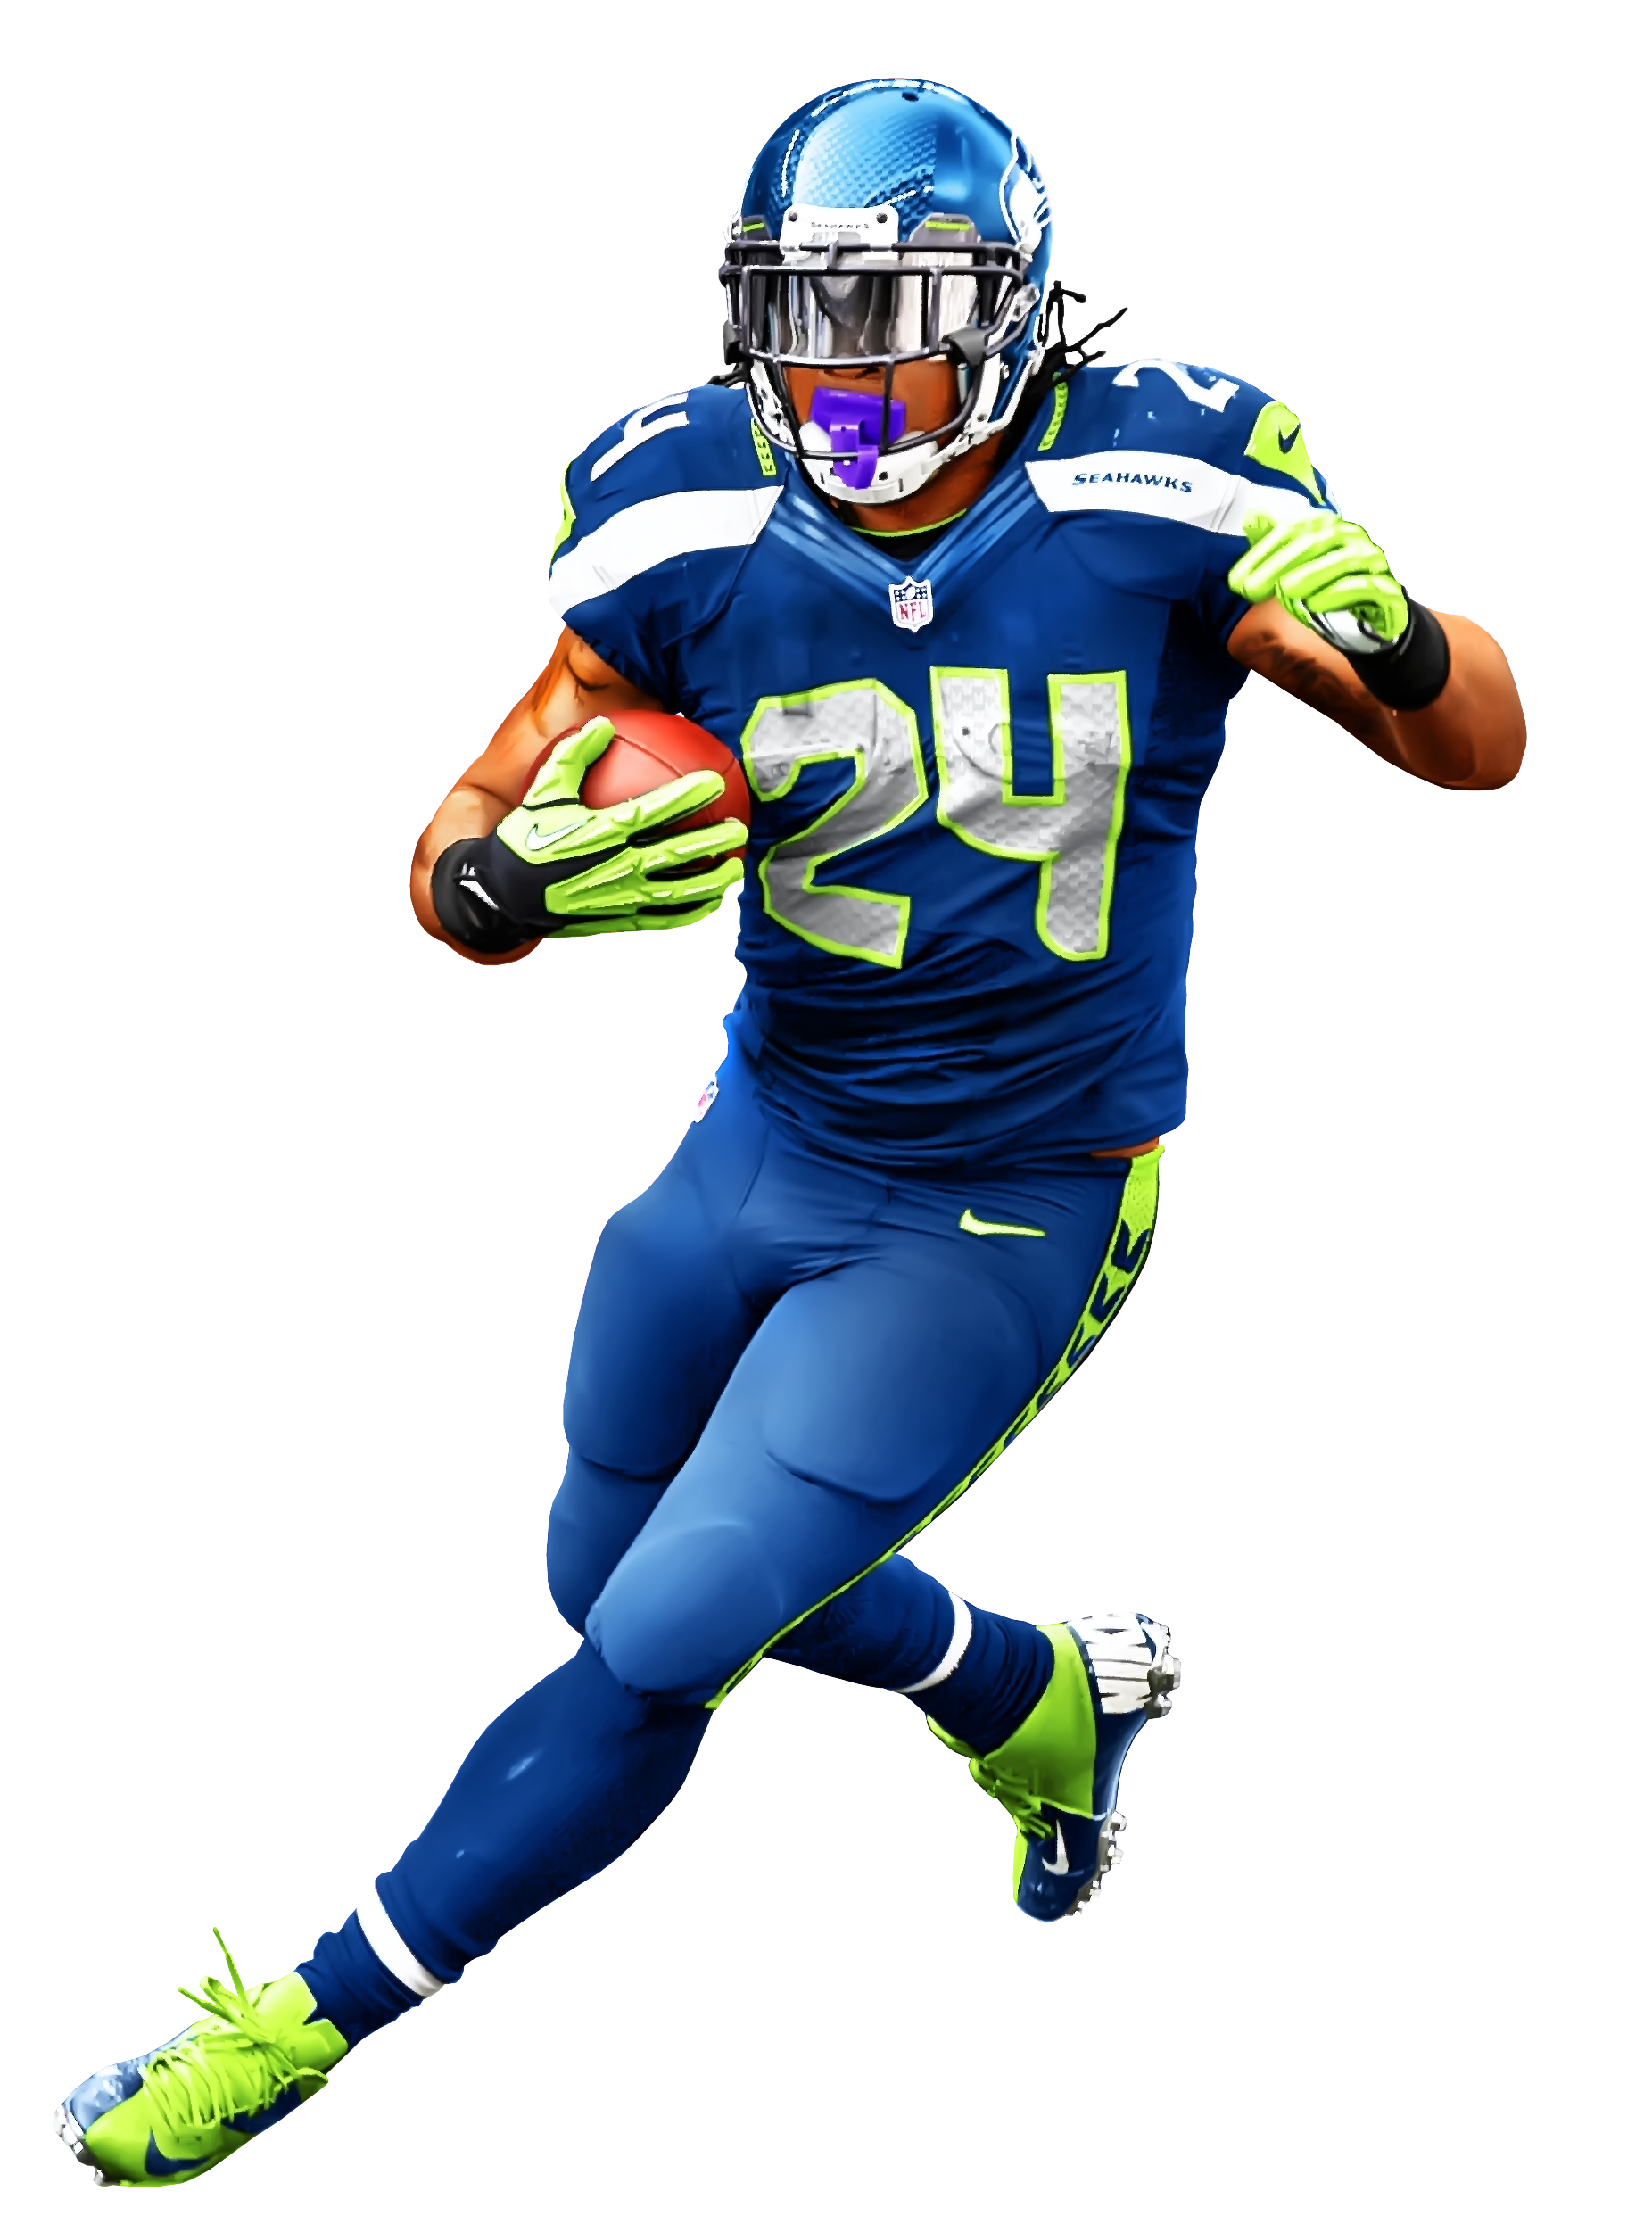 American Football Player PNG Image - PurePNG | Free transparent CC0 PNG